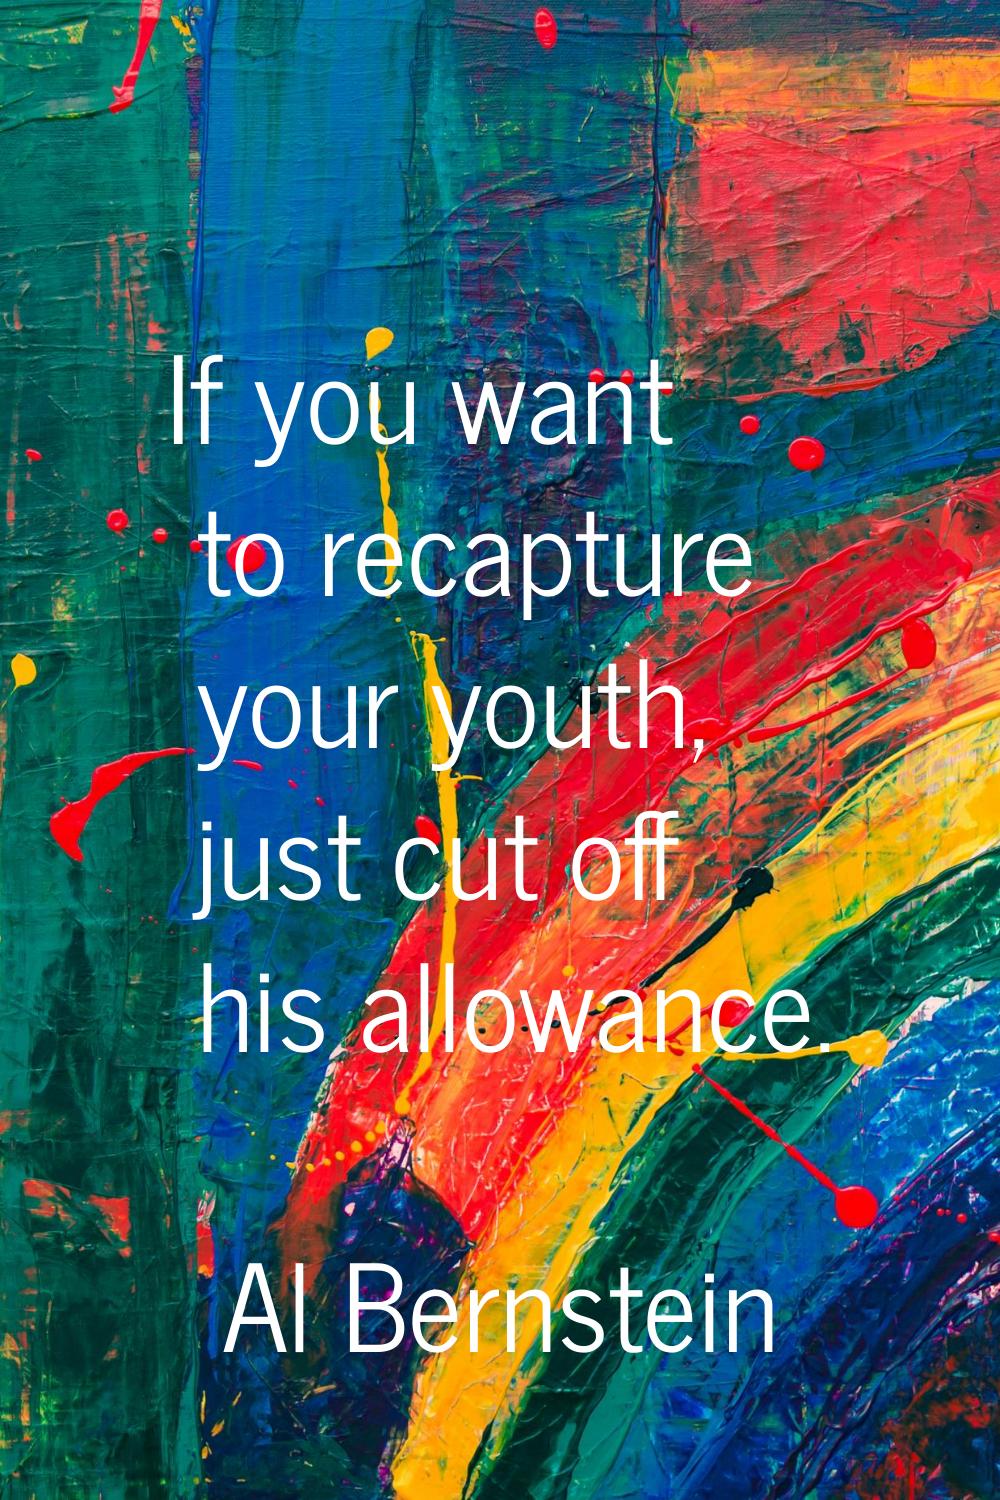 If you want to recapture your youth, just cut off his allowance.